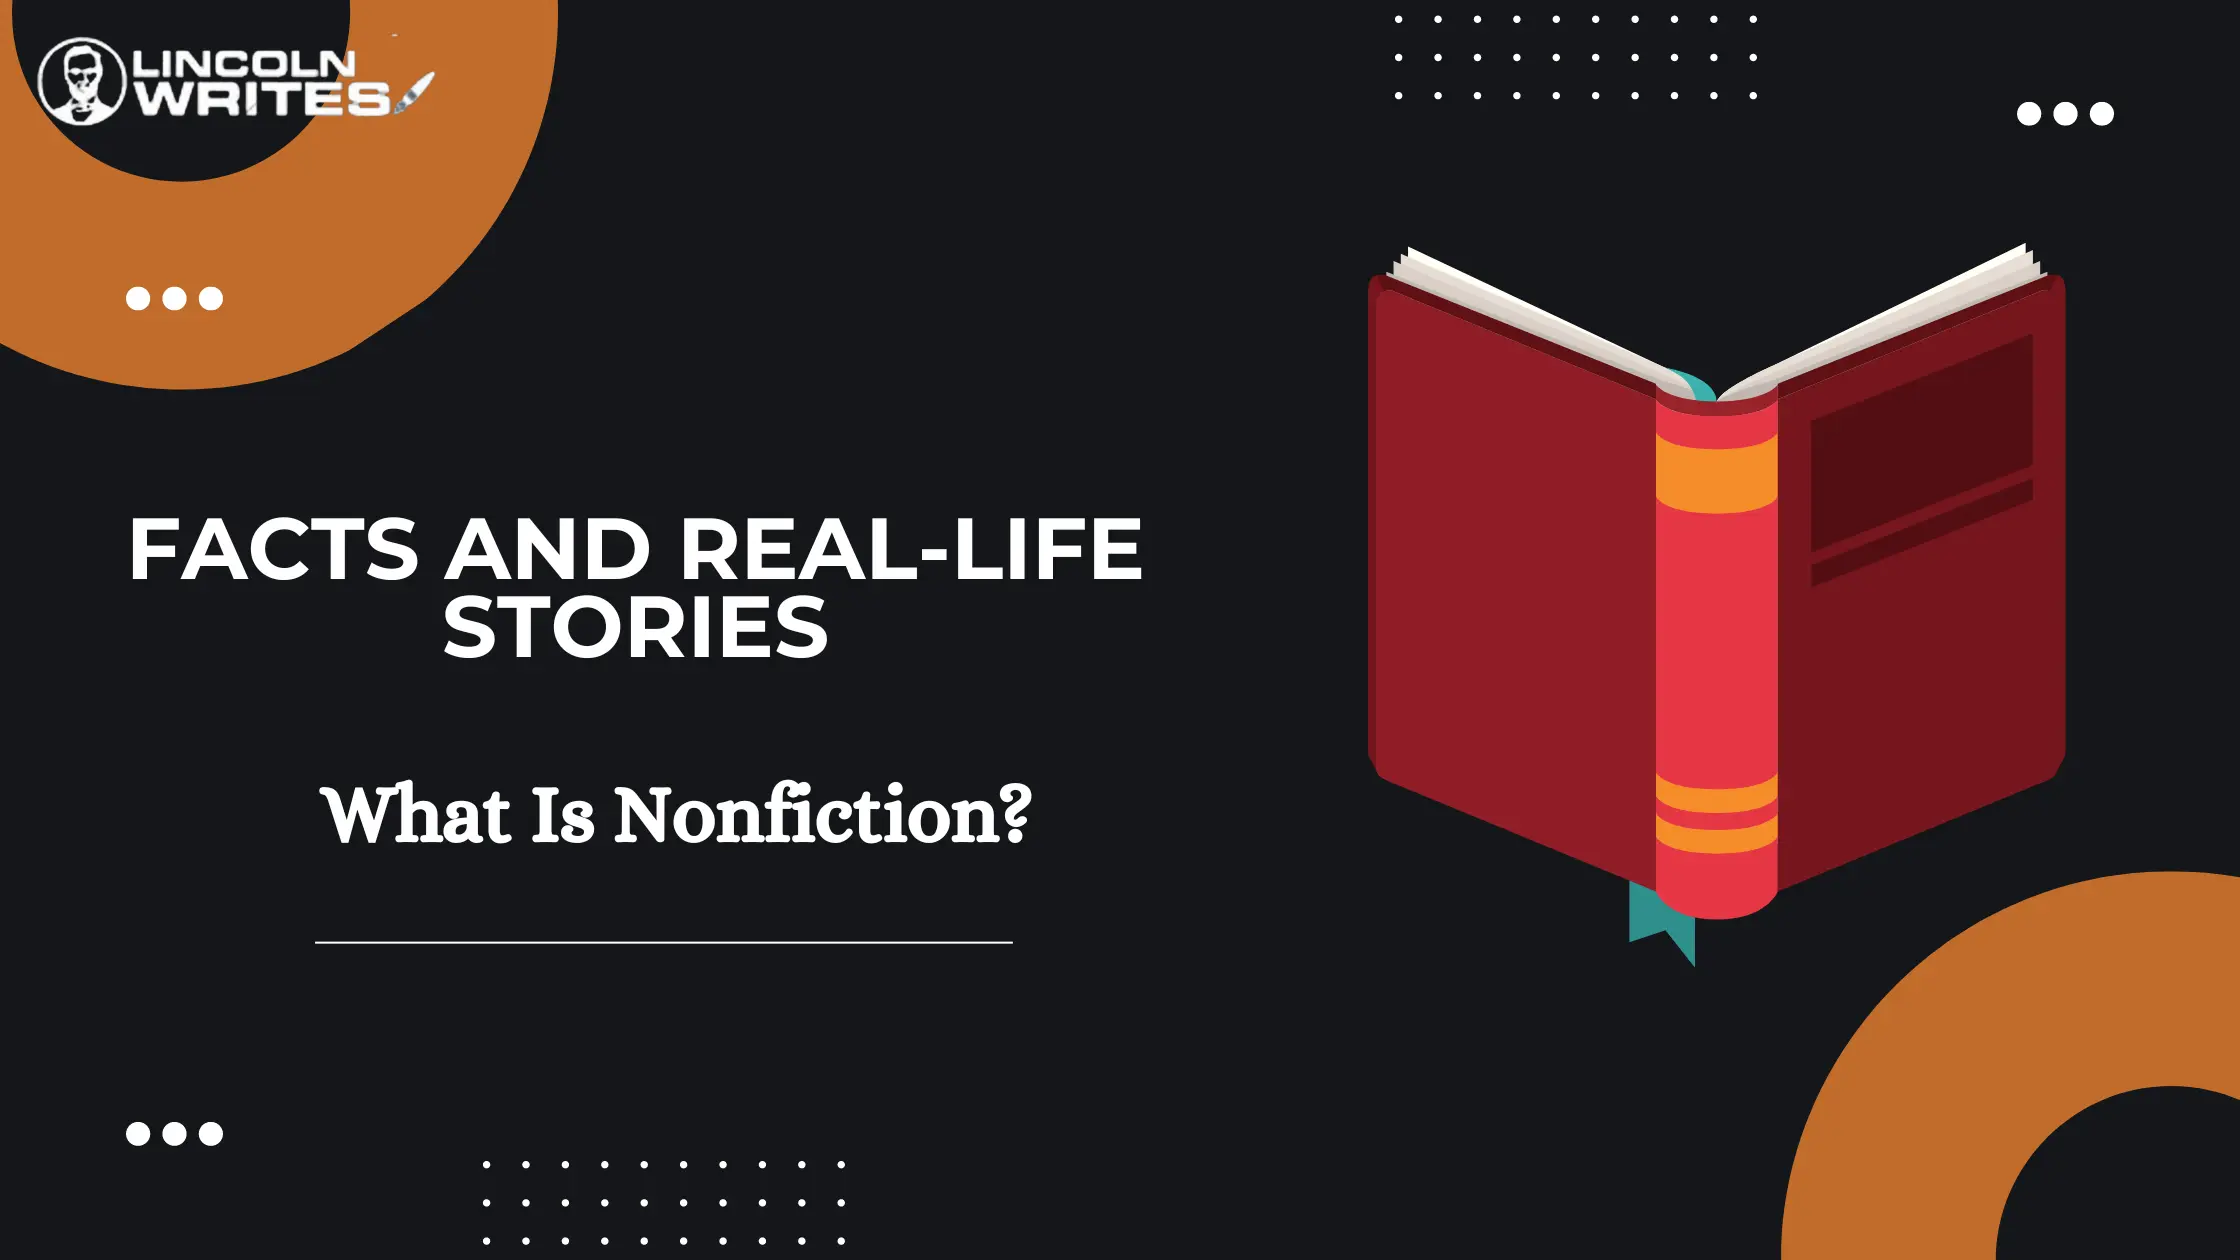 what Is nonfiction? Discovering the facts and real-life stories